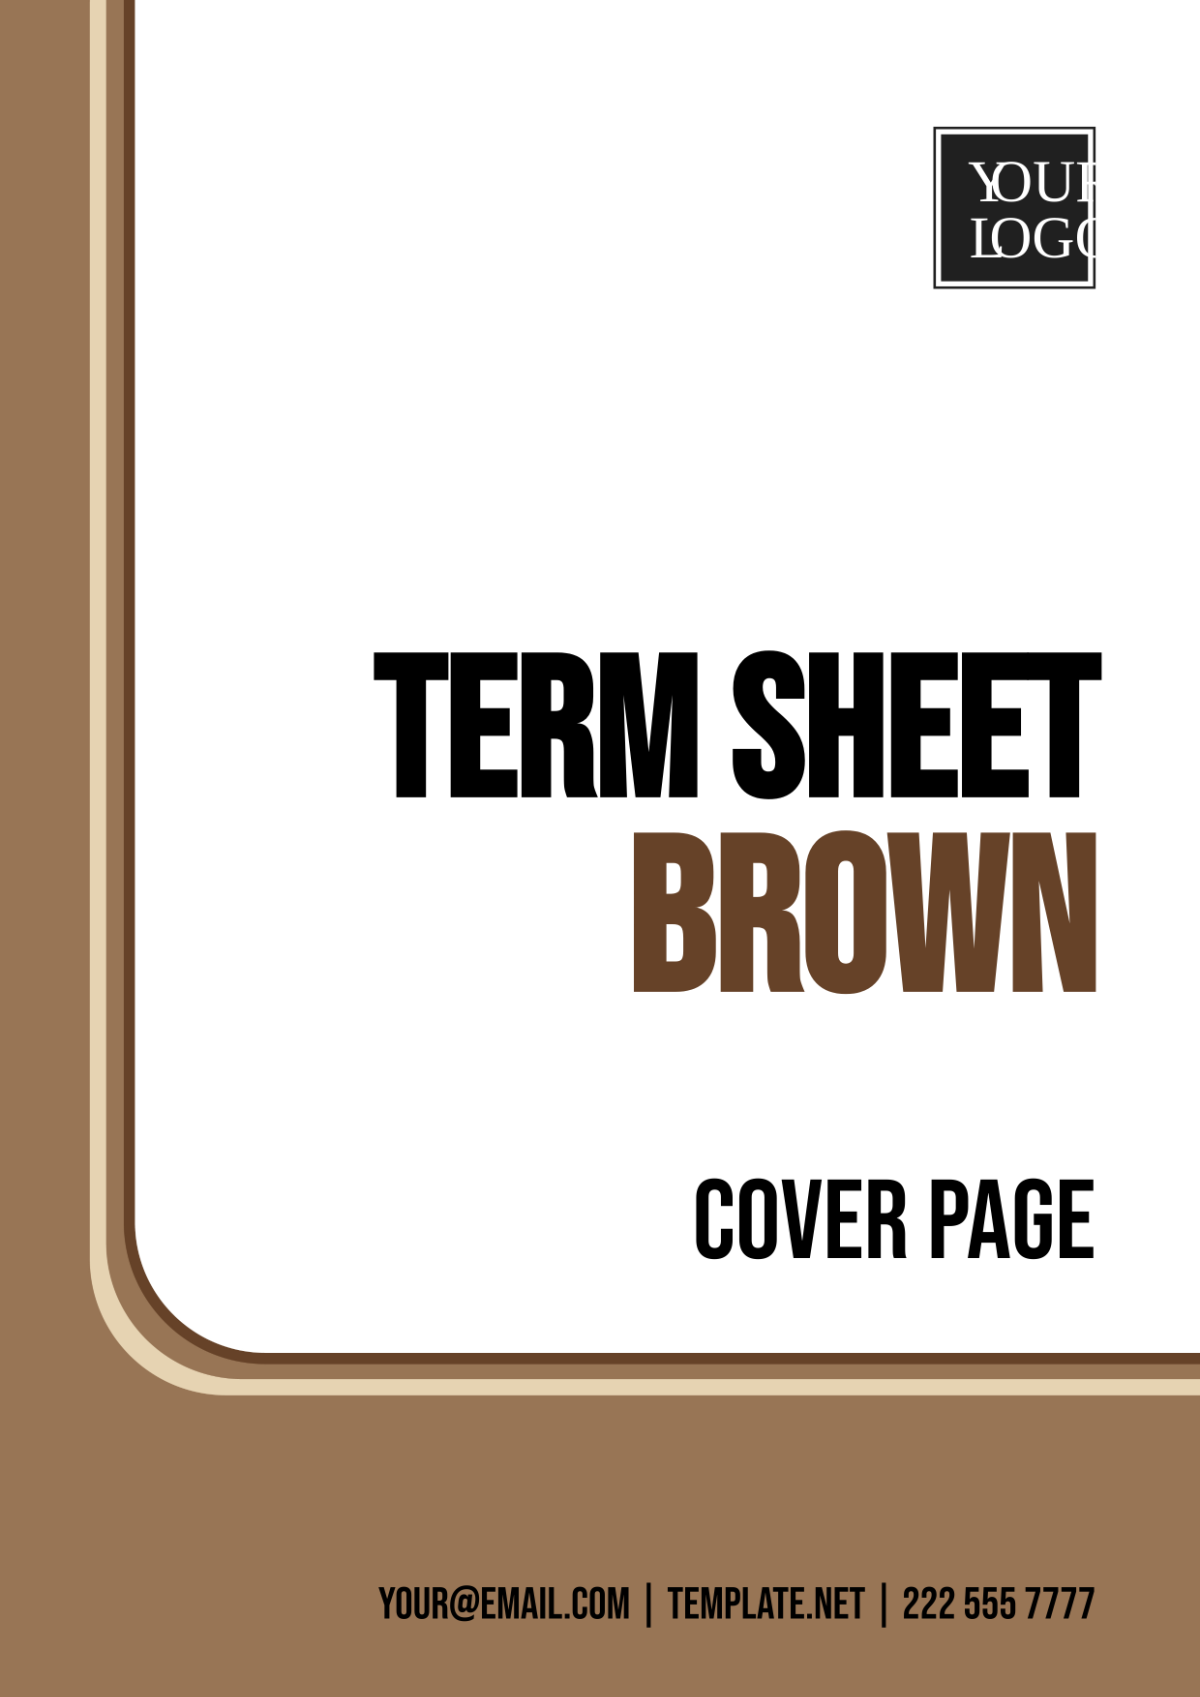 Term Sheet Brown Cover Page